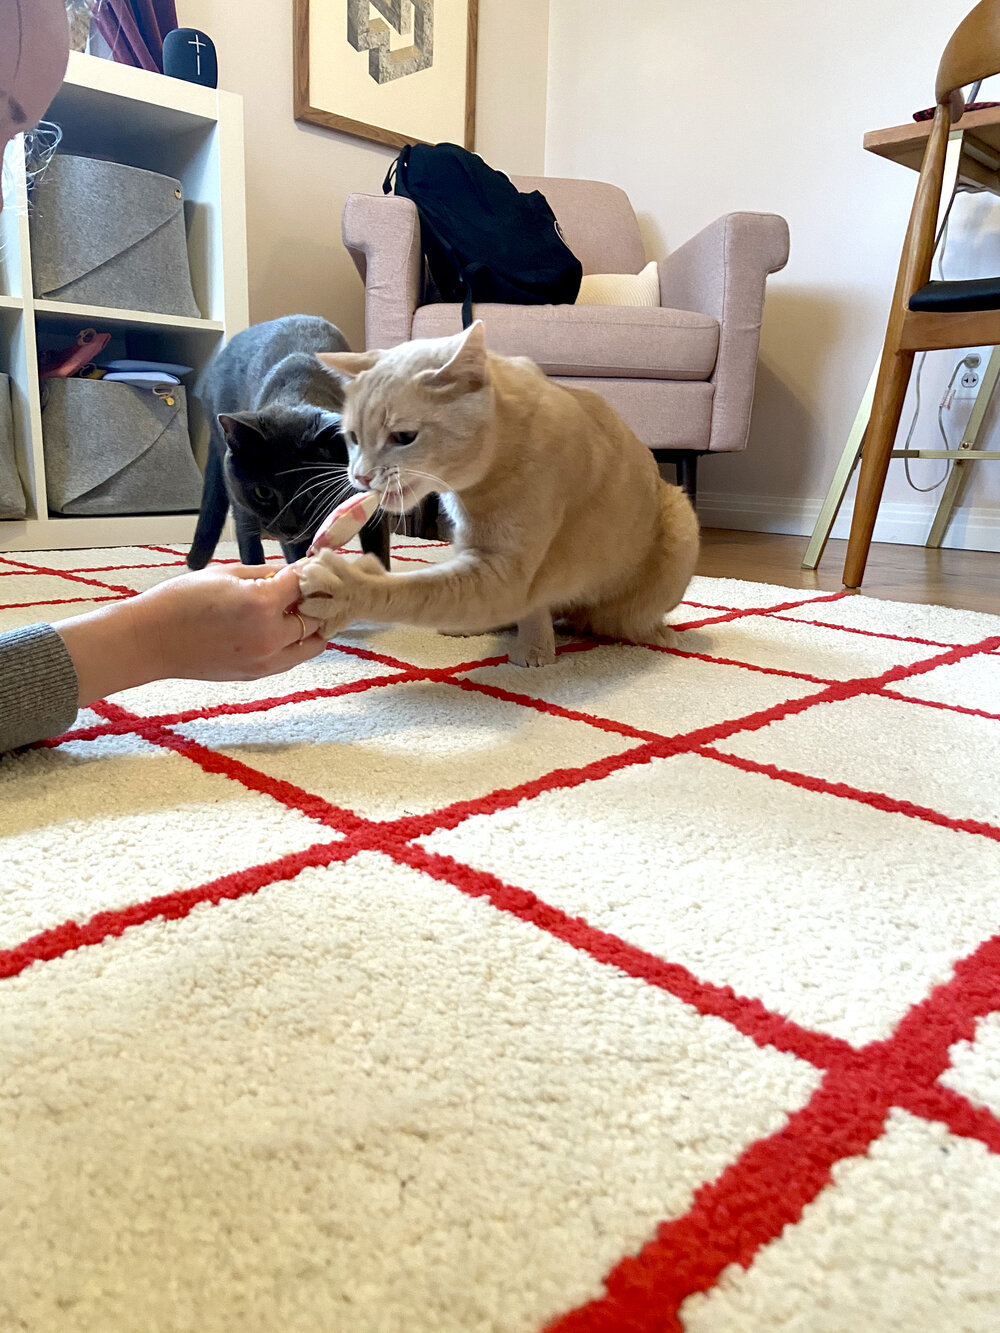 A big orange cat takes the cat toy from Alaina’s hand, smaller gray cat looks on with interest